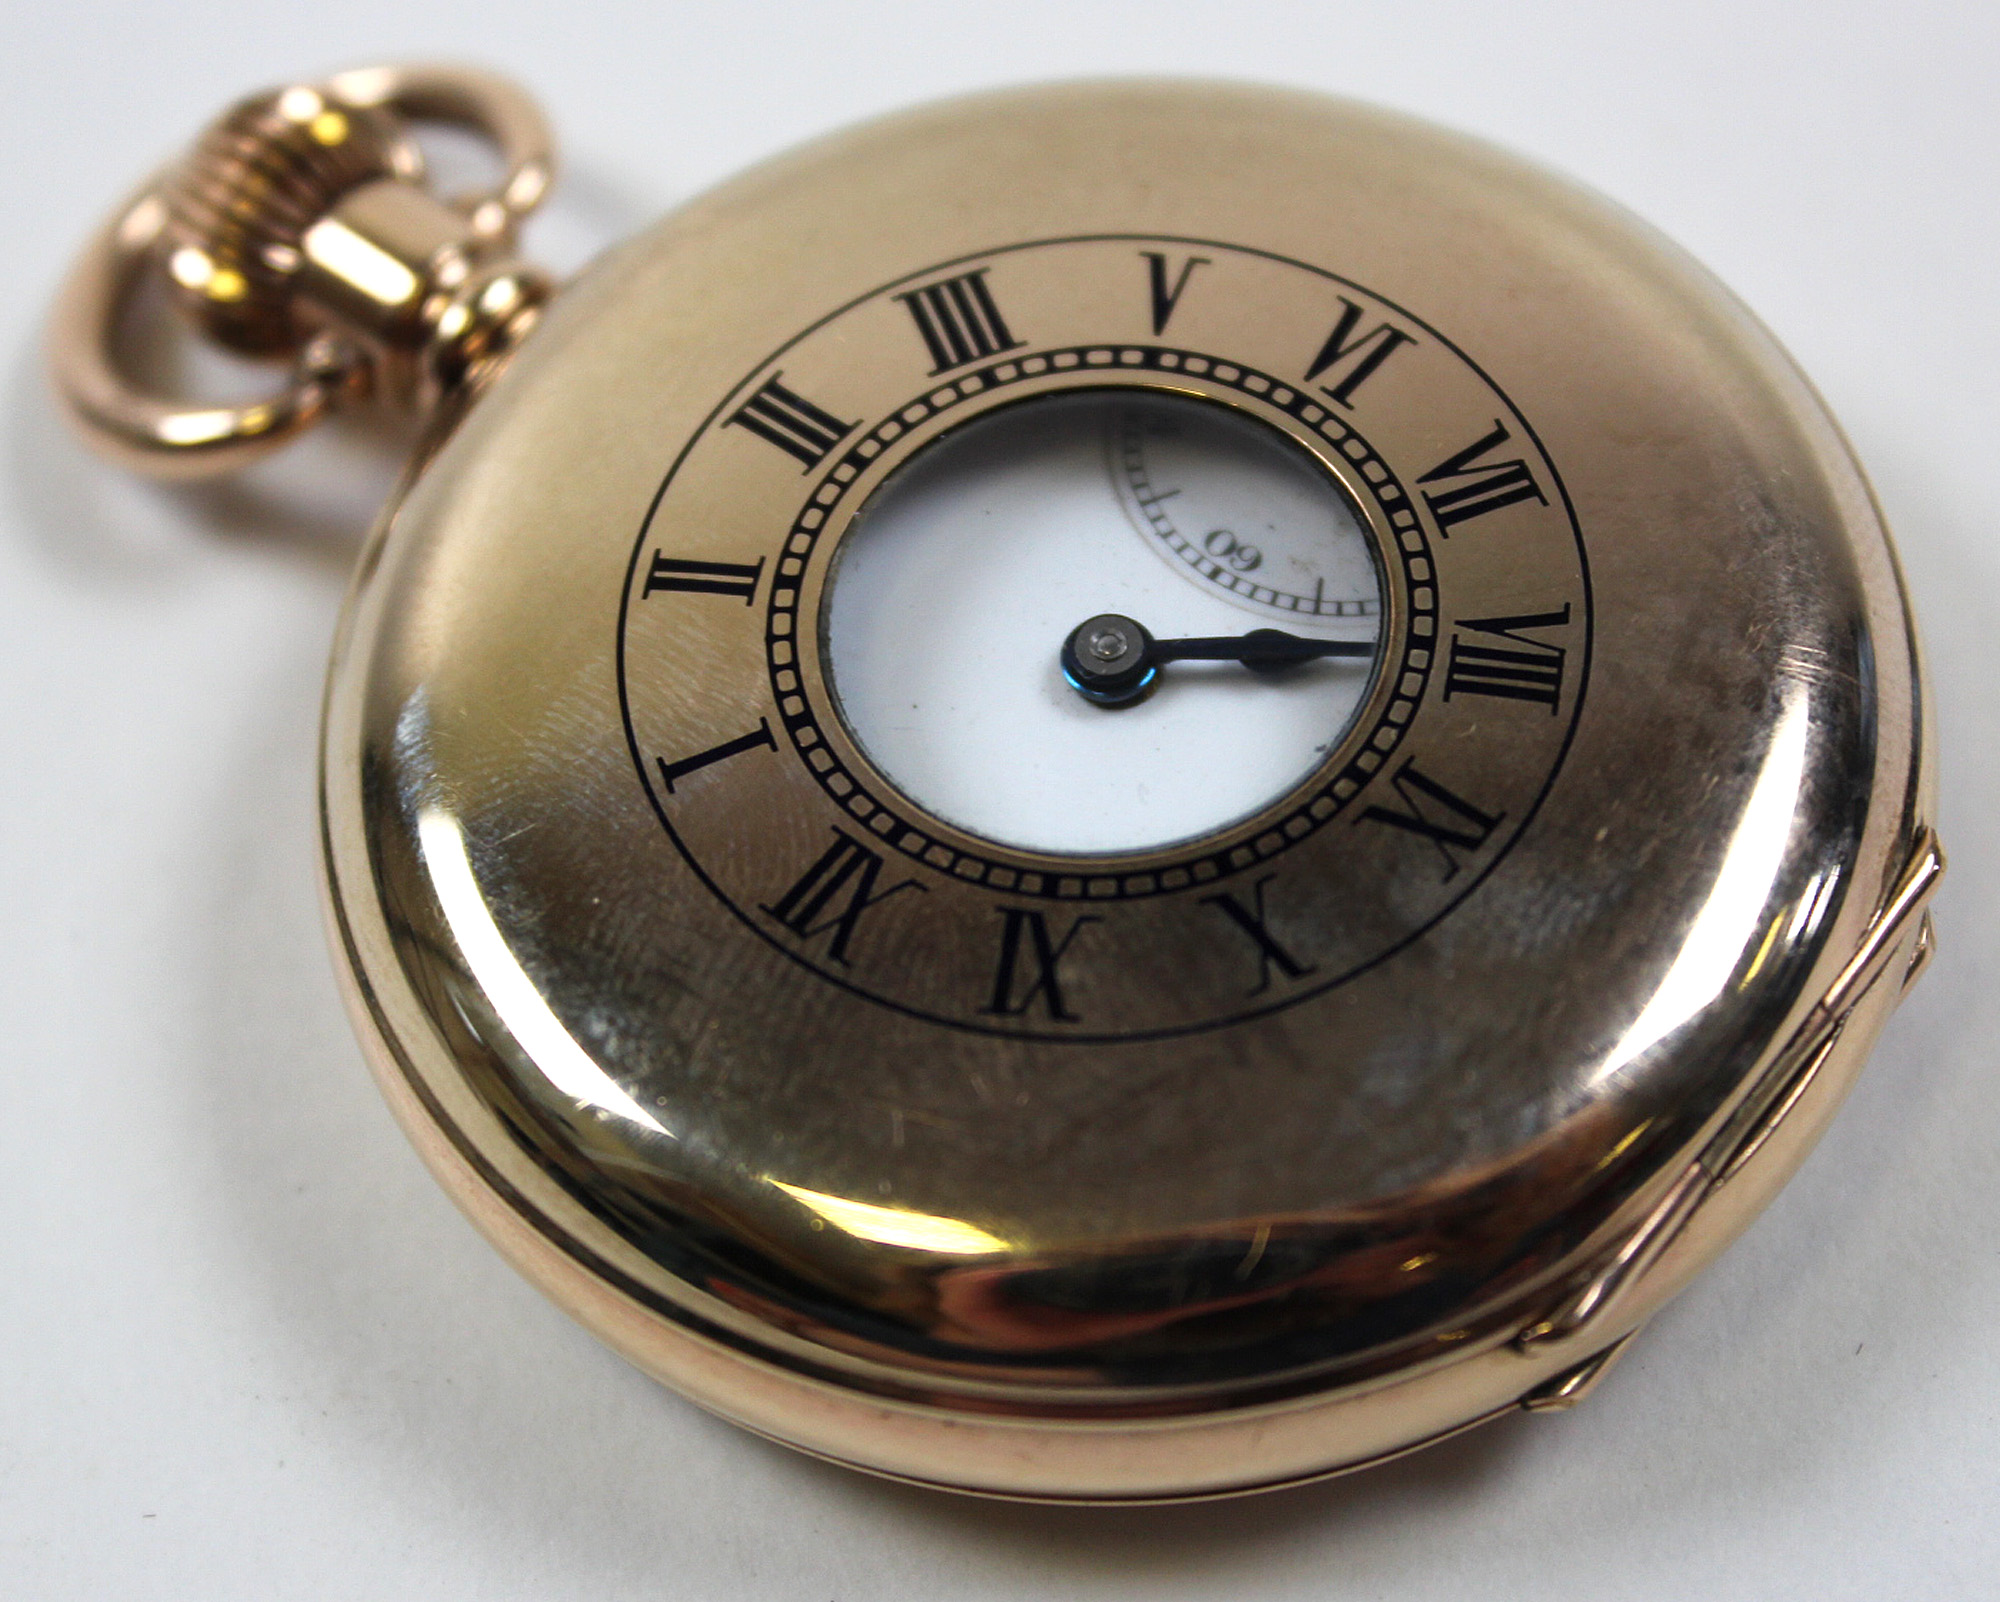 15ct gold half hunter pocket watch in the "Moon" case by Dennison (missing glass)